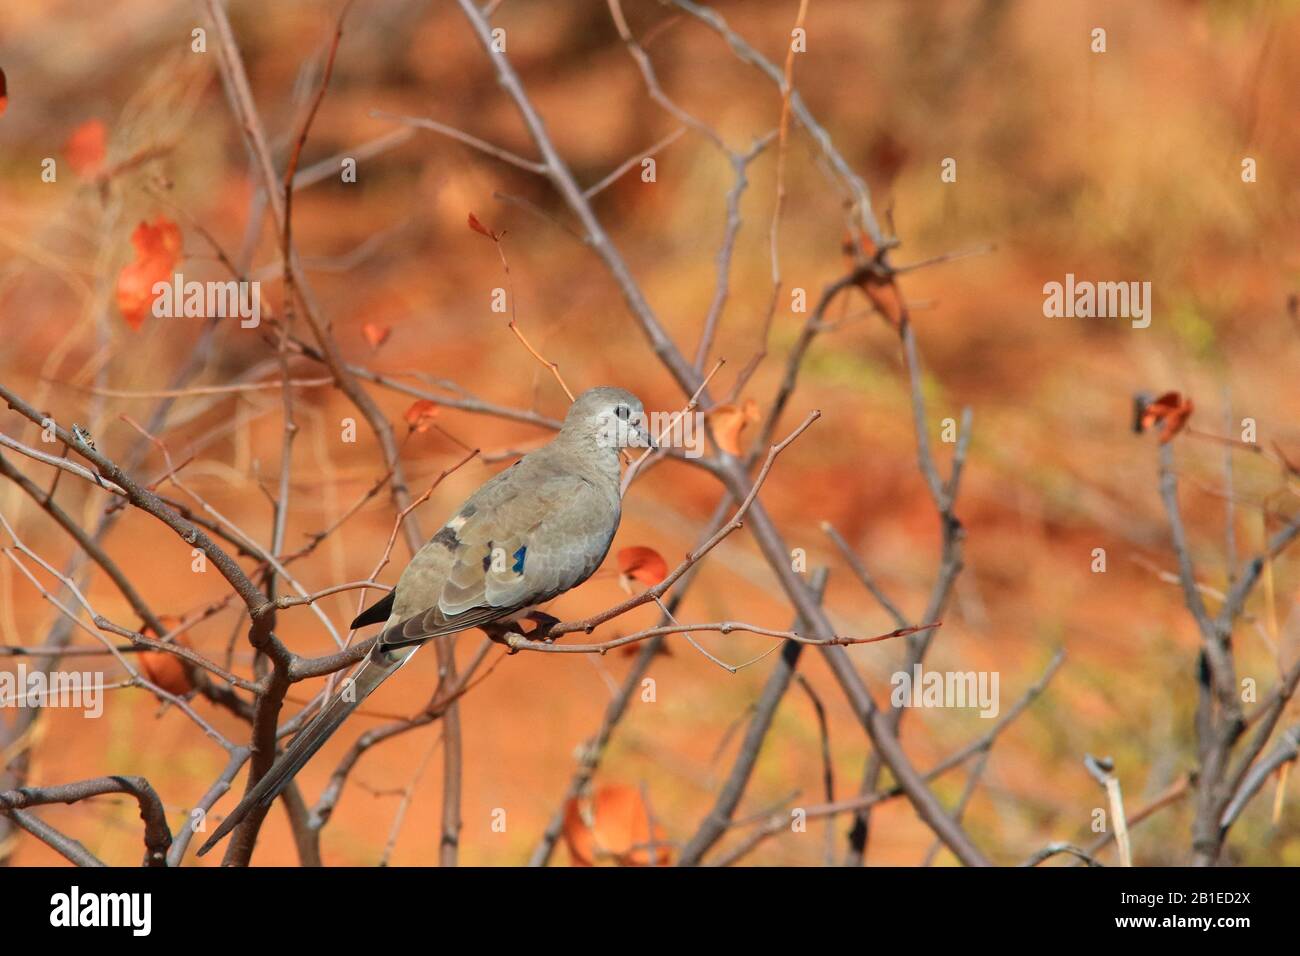 Namaqua Dove (Oena capensis) on a branch, South Africa Stock Photo